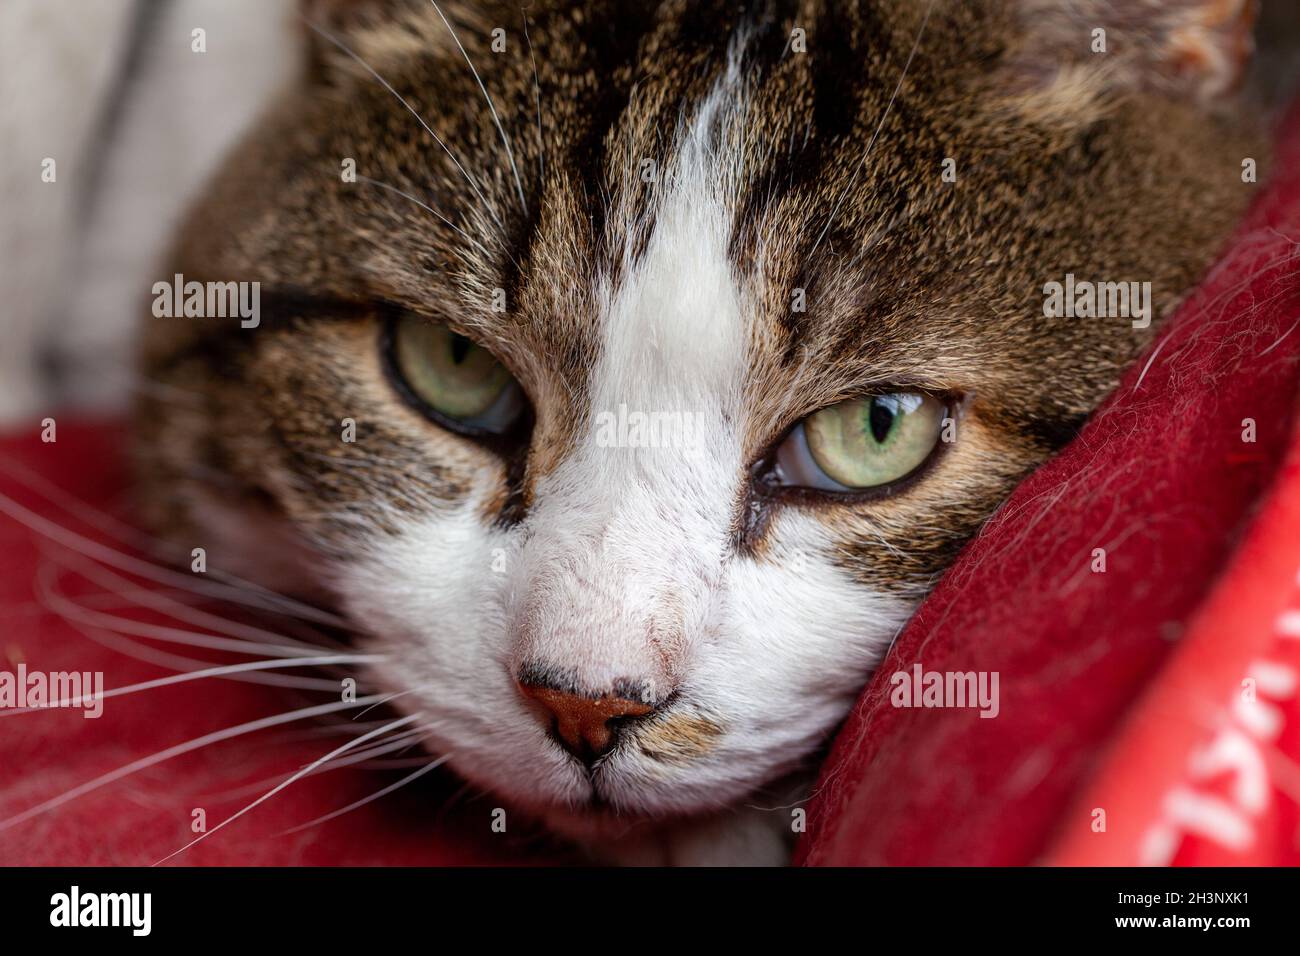 Close up portrait of a tabby and white cat with green eyes in a red cushion Stock Photo